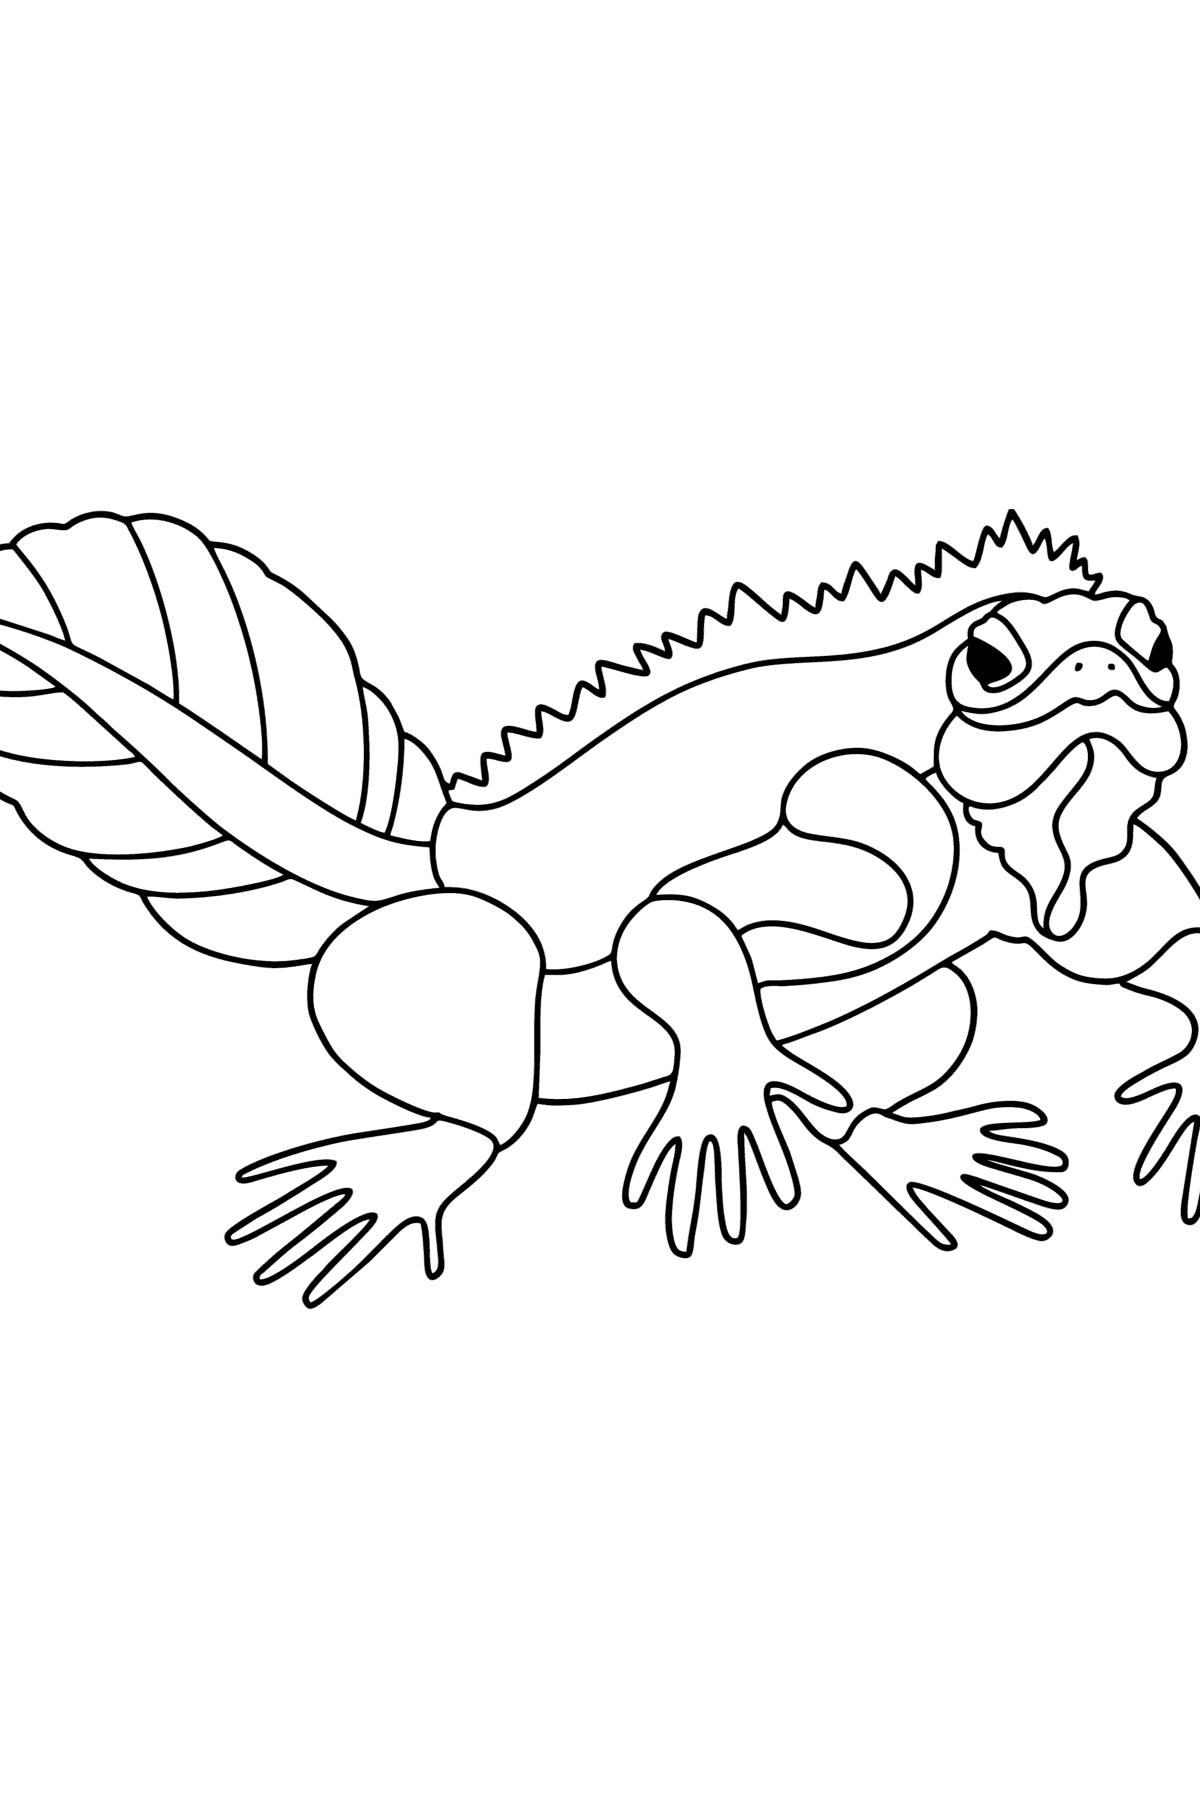 Water dragon сoloring page - Coloring Pages for Kids